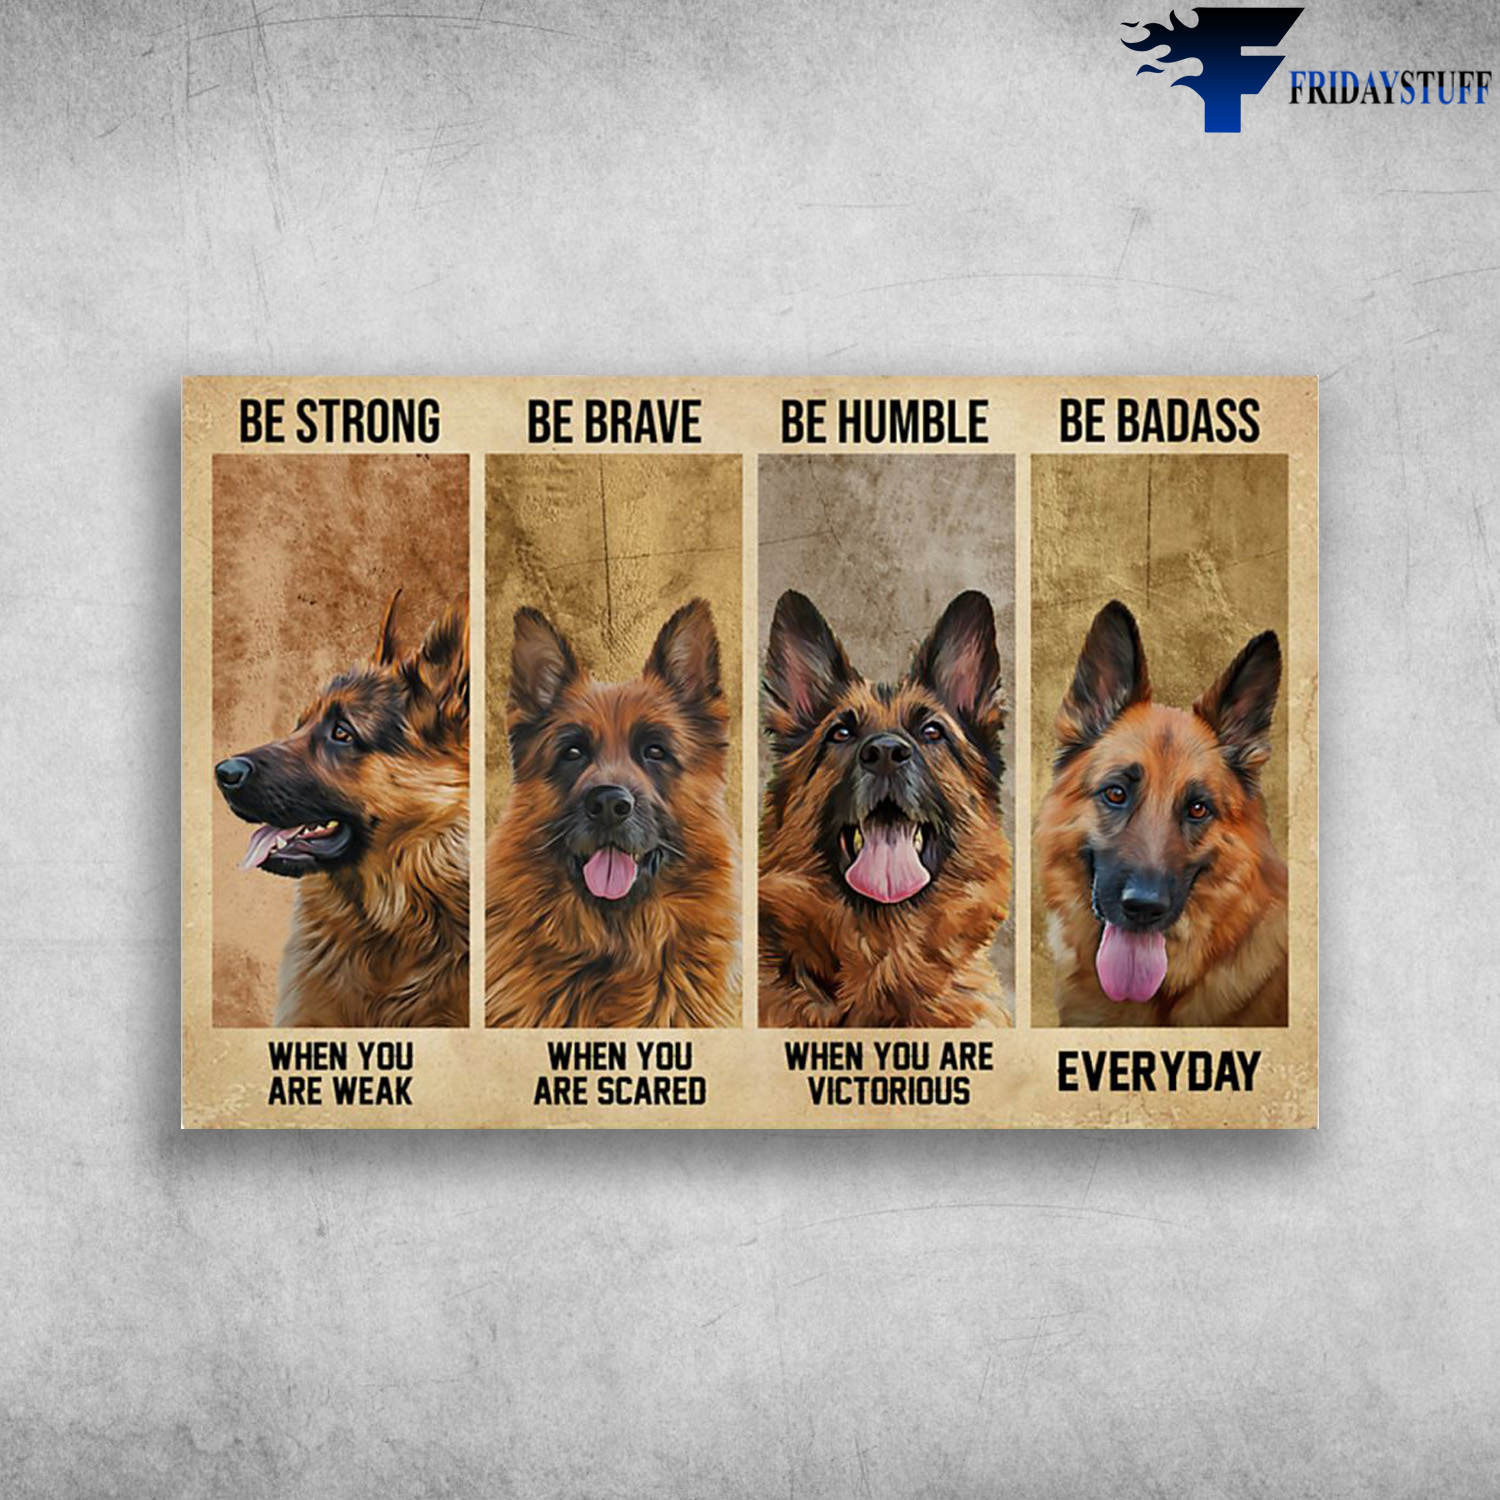 German Shepherd Dog - Be Strong When You Are Weak, Be Brave When You Are Scared